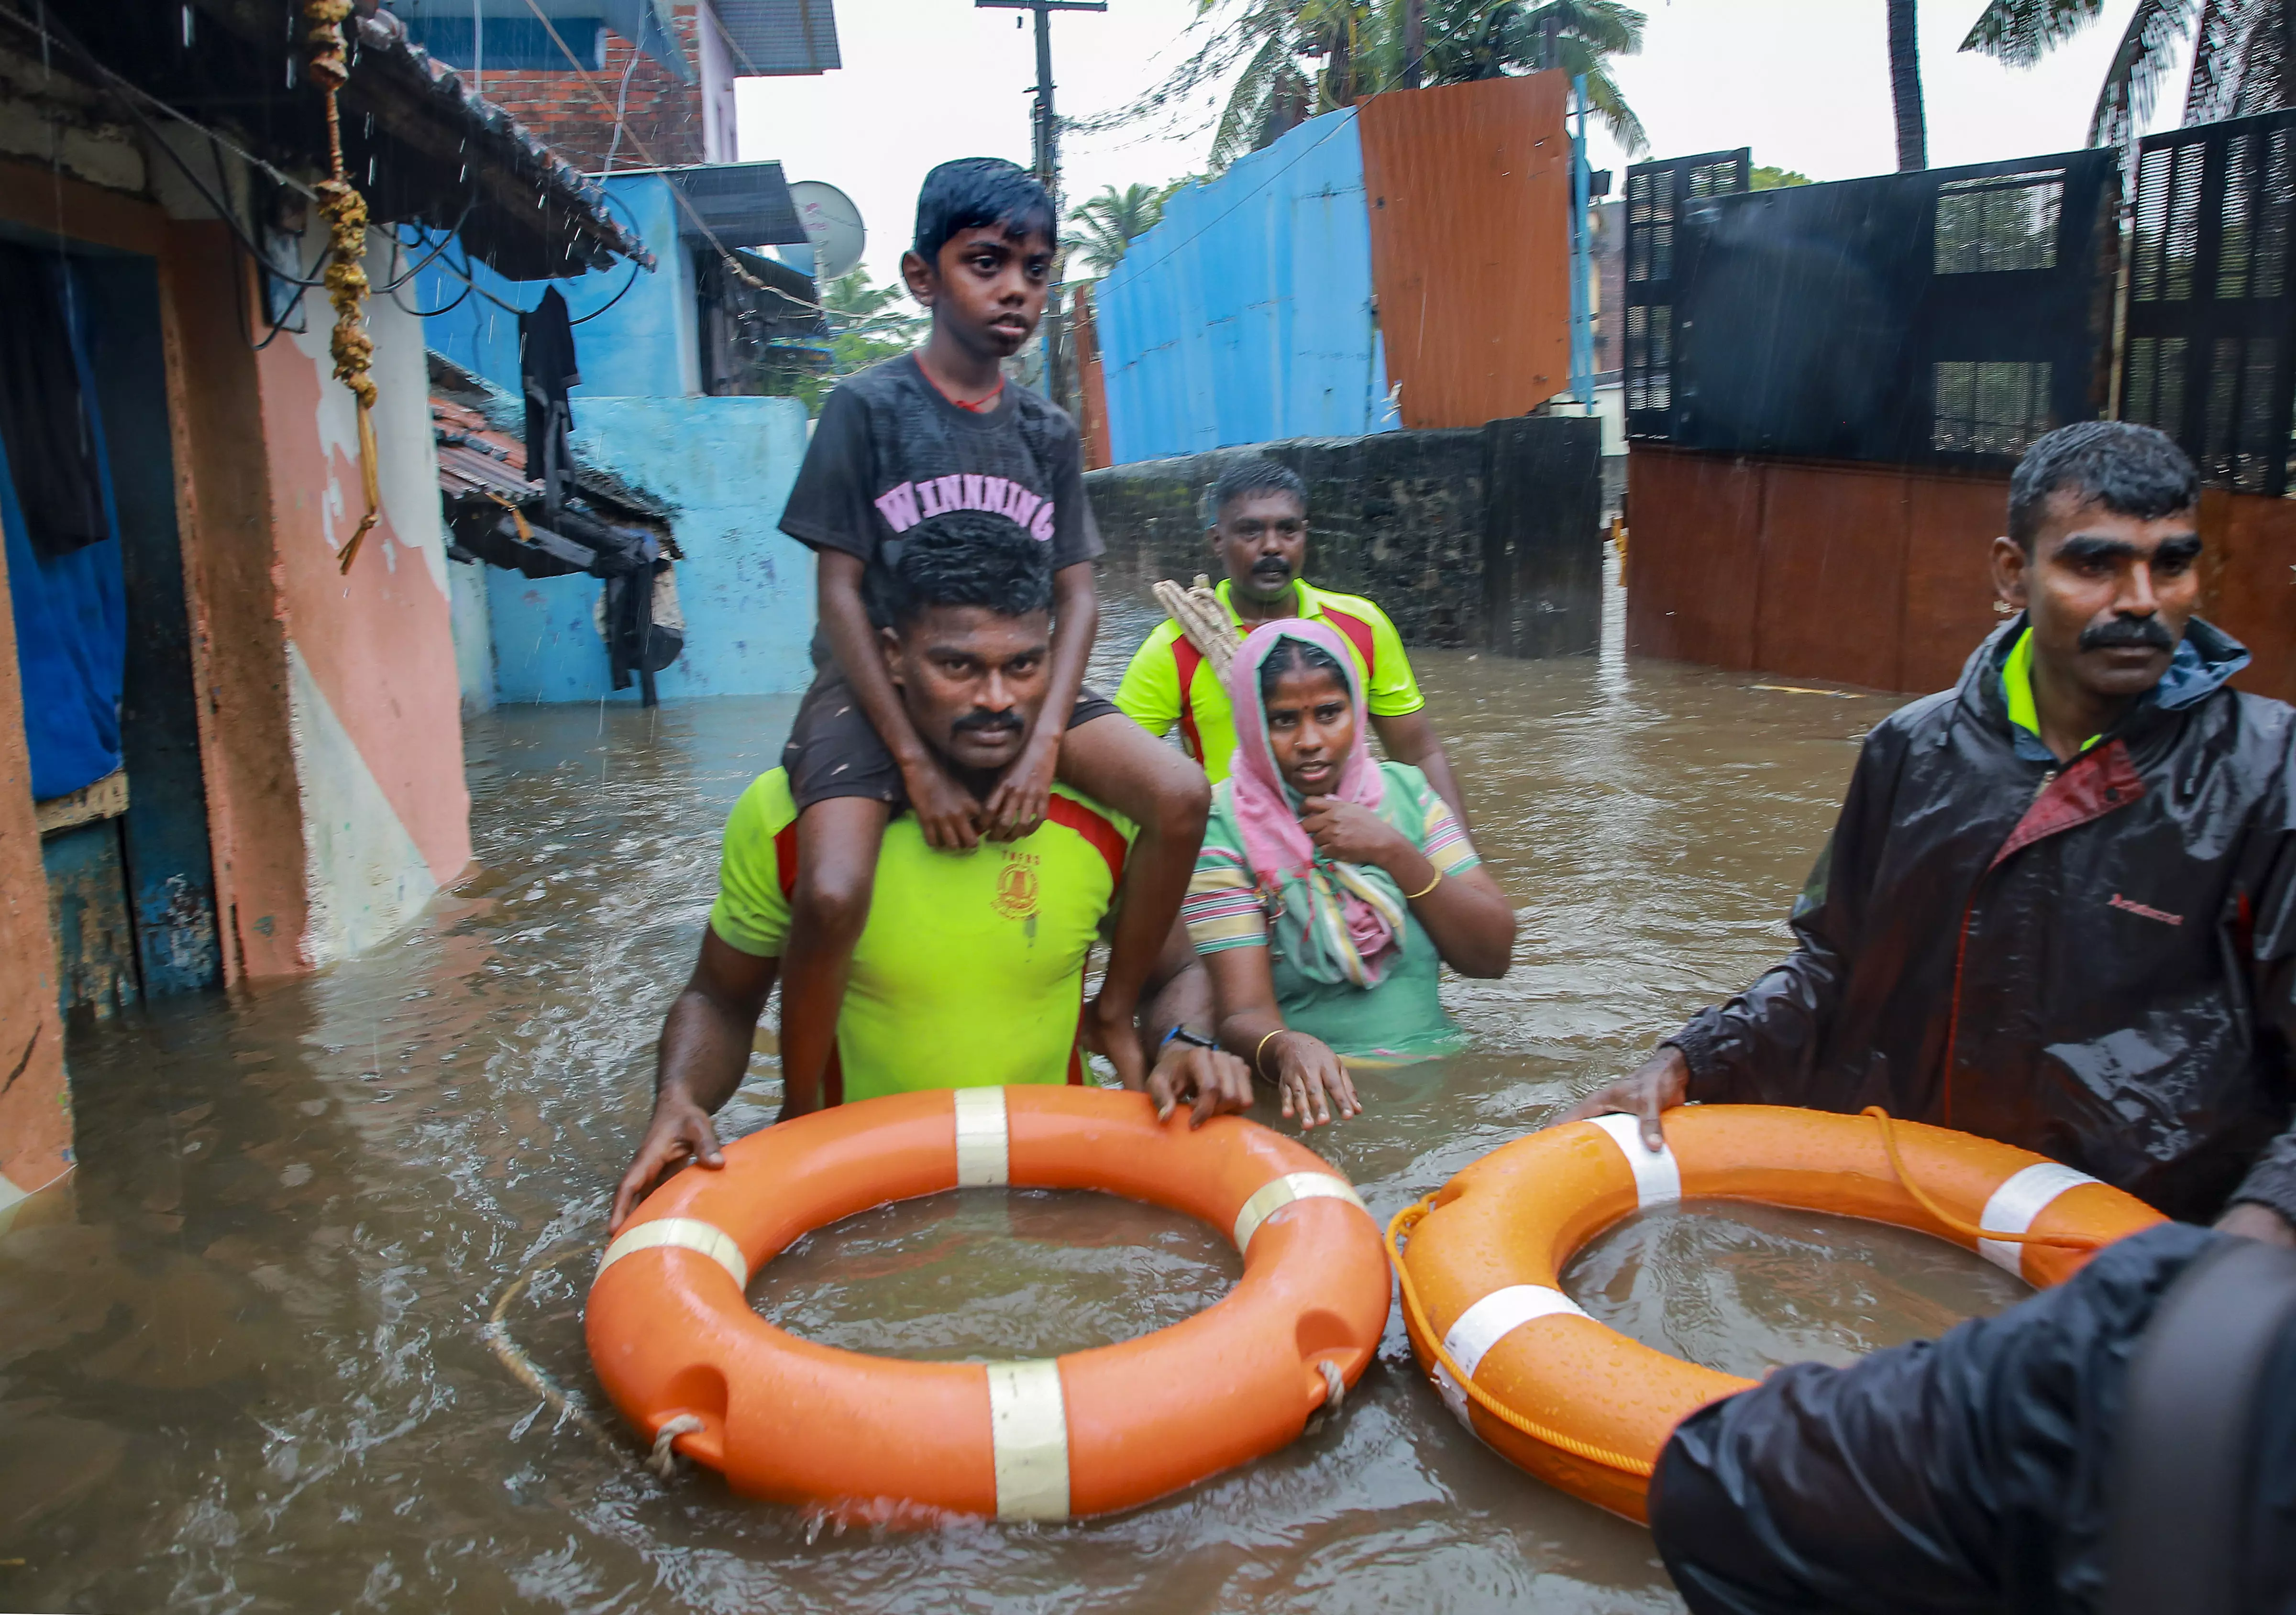 Patna ranked most vulnerable to floods in India, claims new research